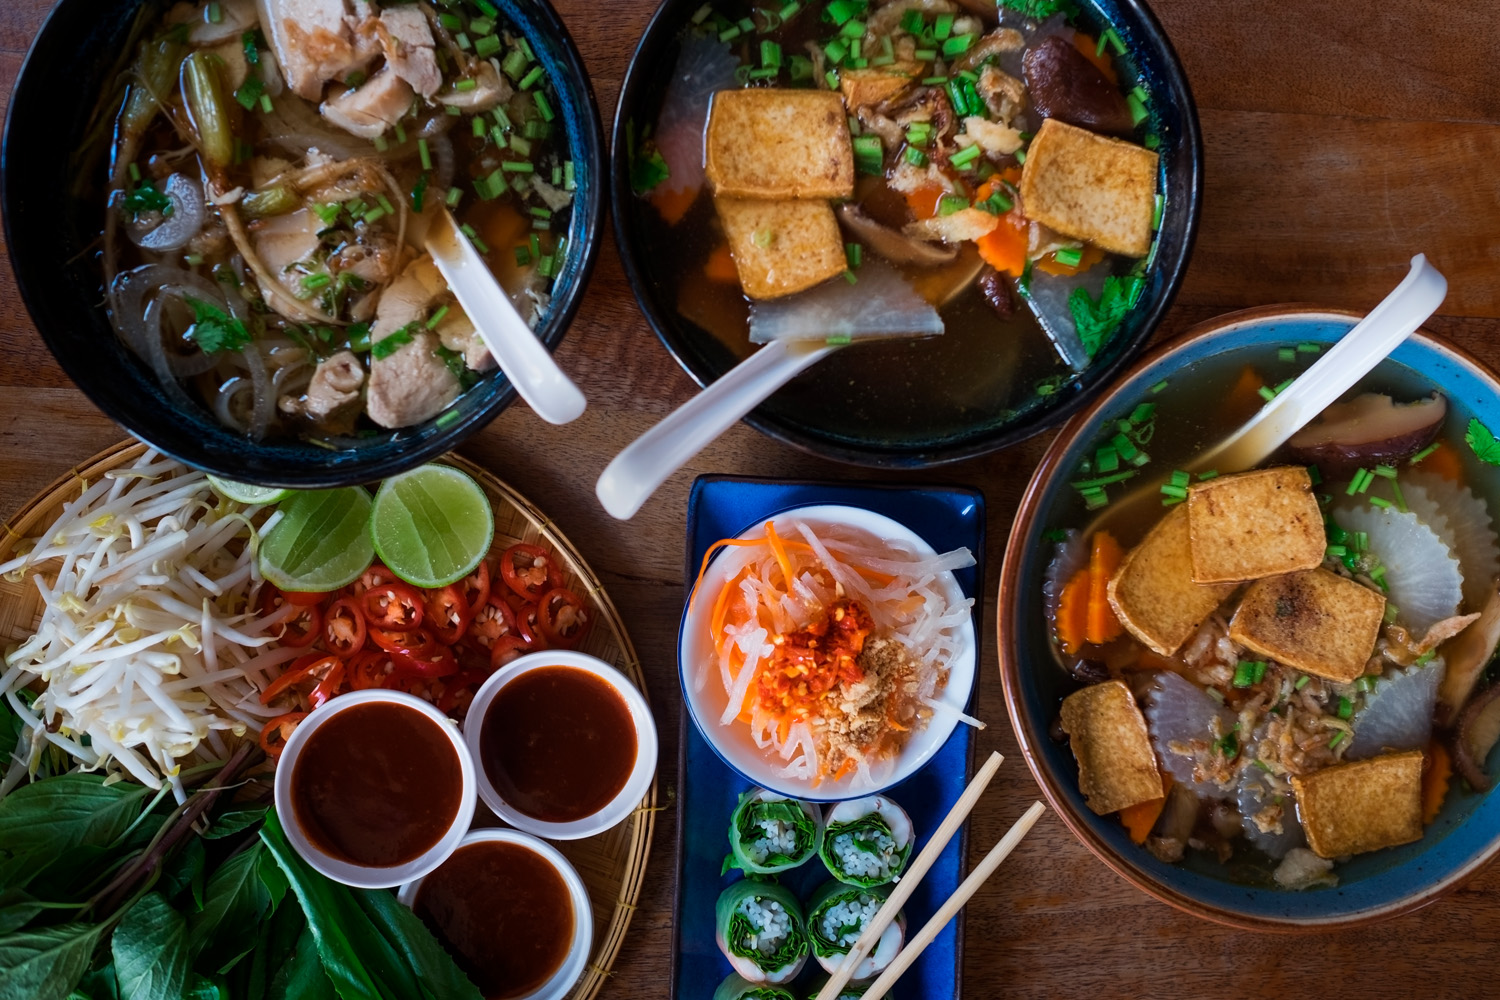 Traditional Vietnamese food. Soups, rolls and fresh herbs. Plates on a wooden surface. View from top to bottom. Vietnamese Food